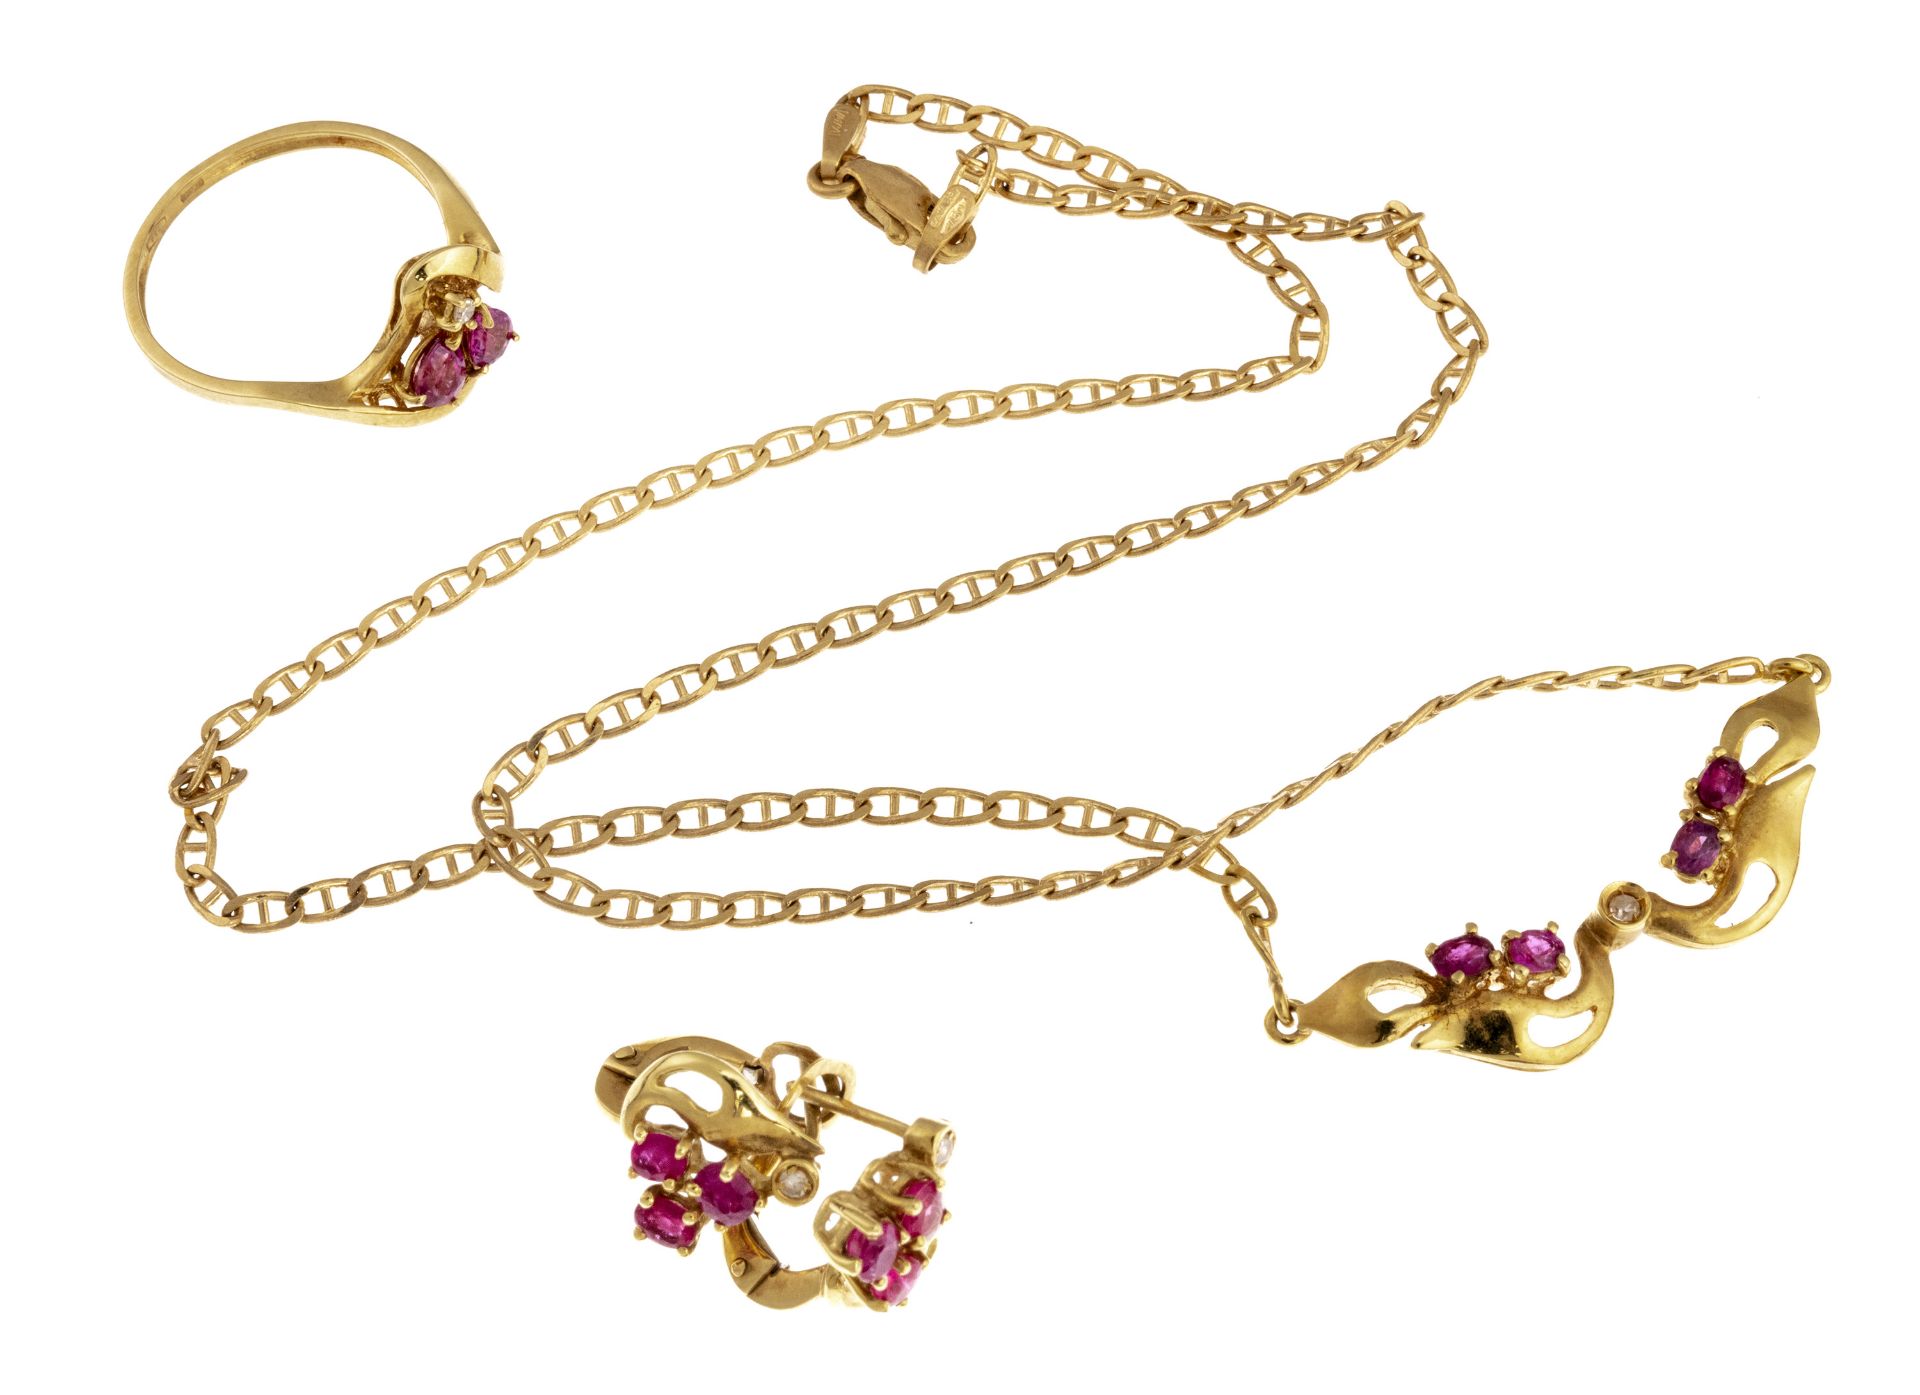 GOLD NECKLACE AND RING WITH RUBIES AND DIAMONDS